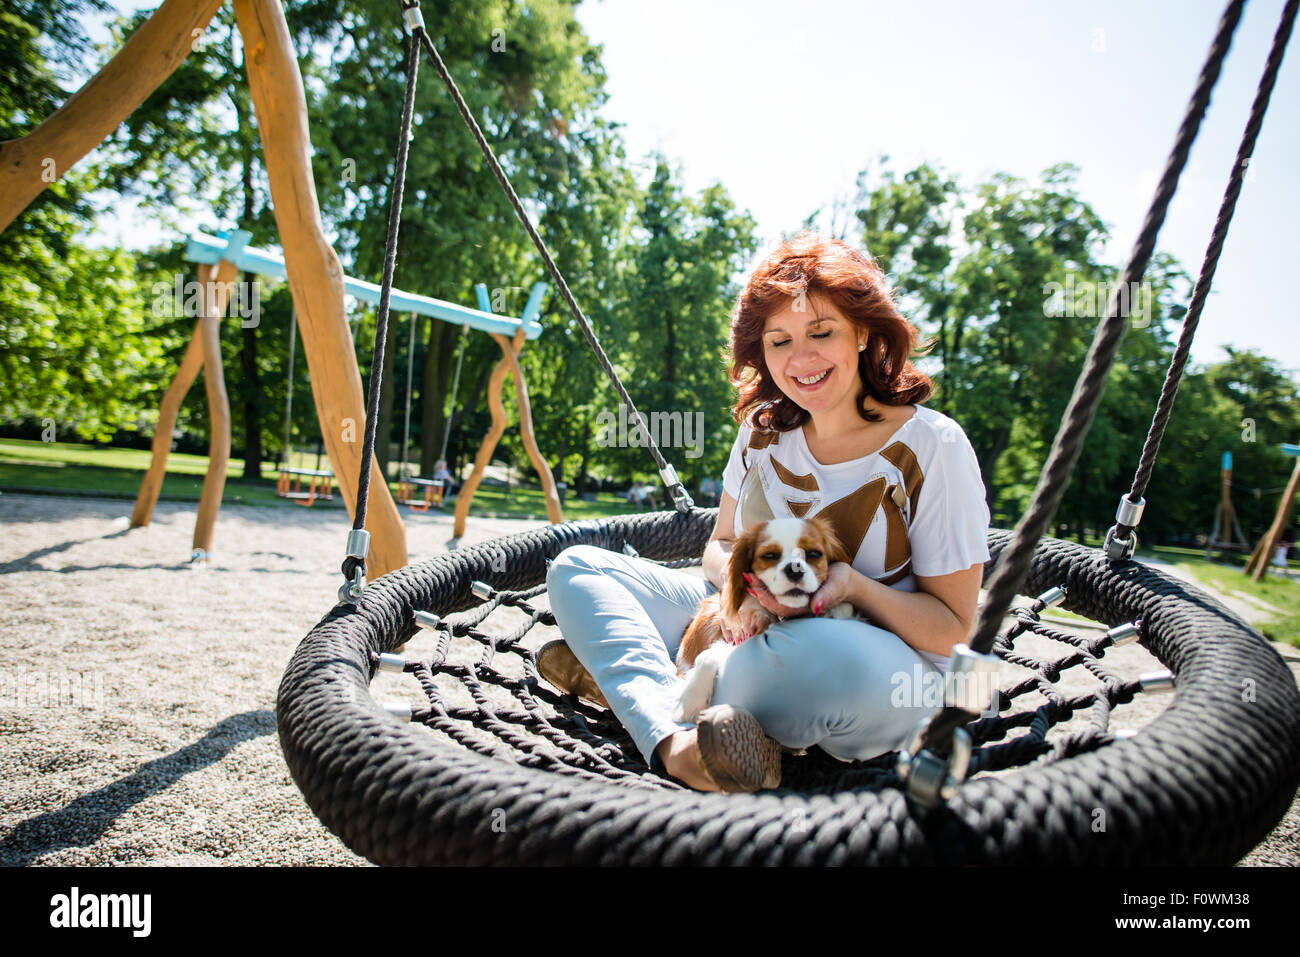 Mature woman swing with her cavalier dog outdoor in playground Stock Photo